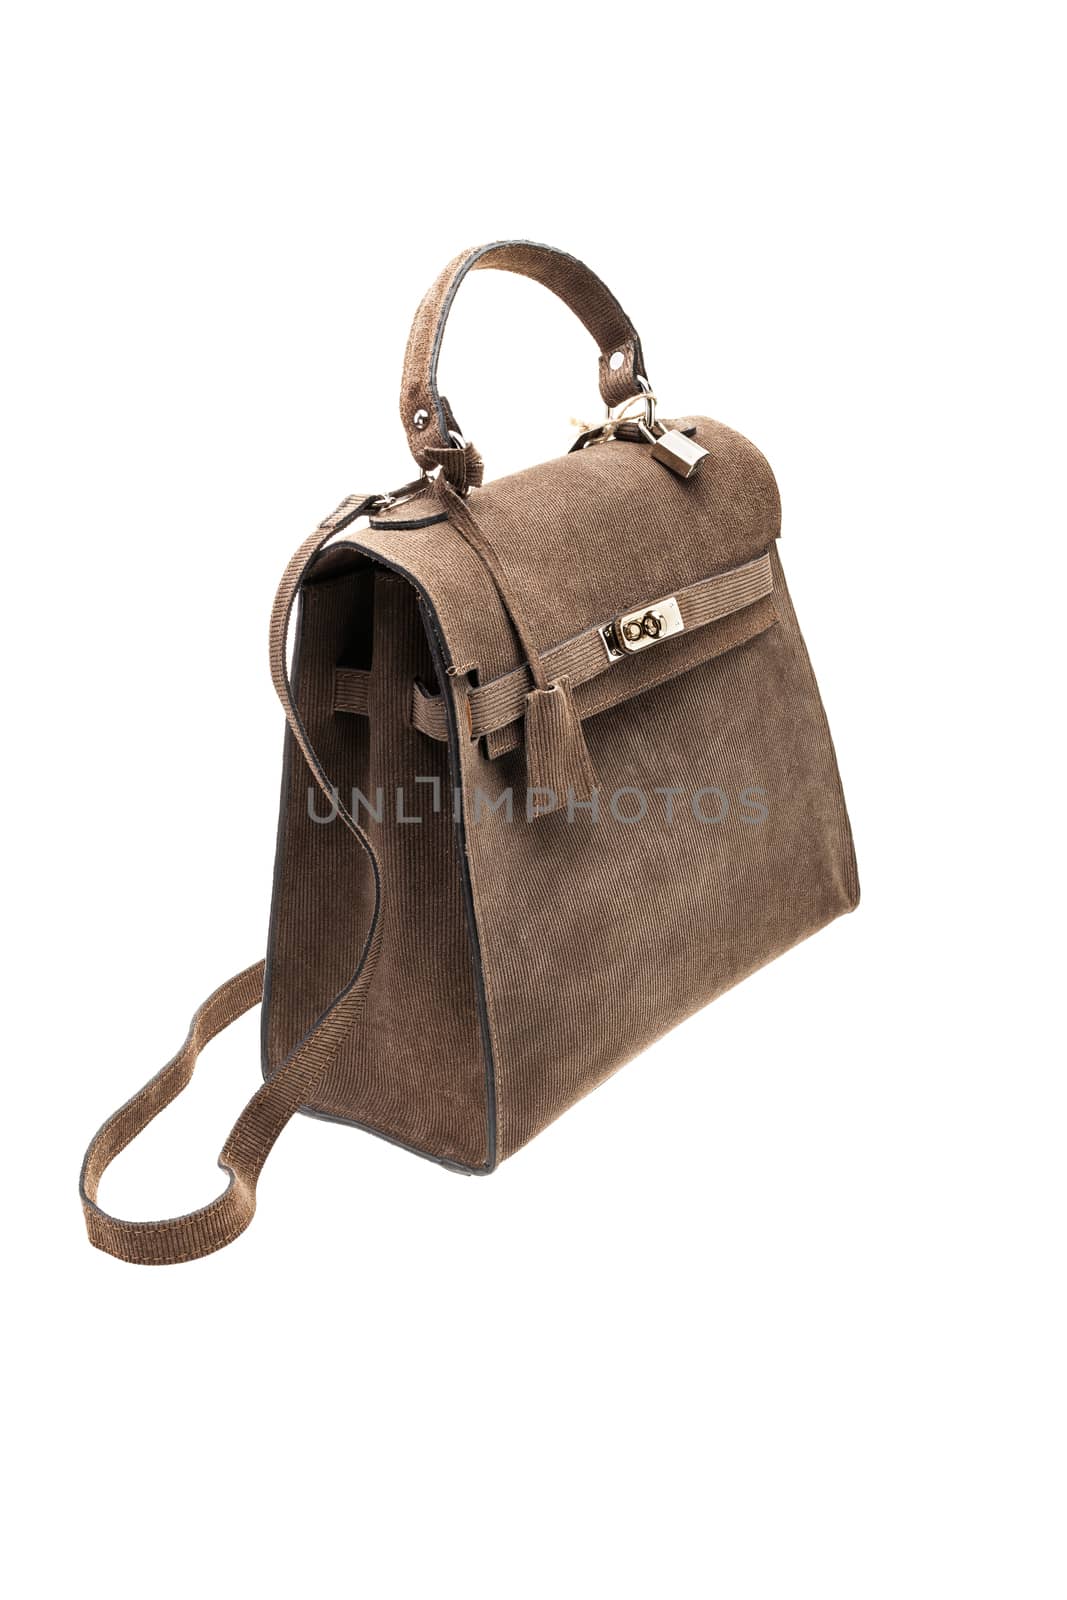 New Brown leather womens bag isolated on white background.